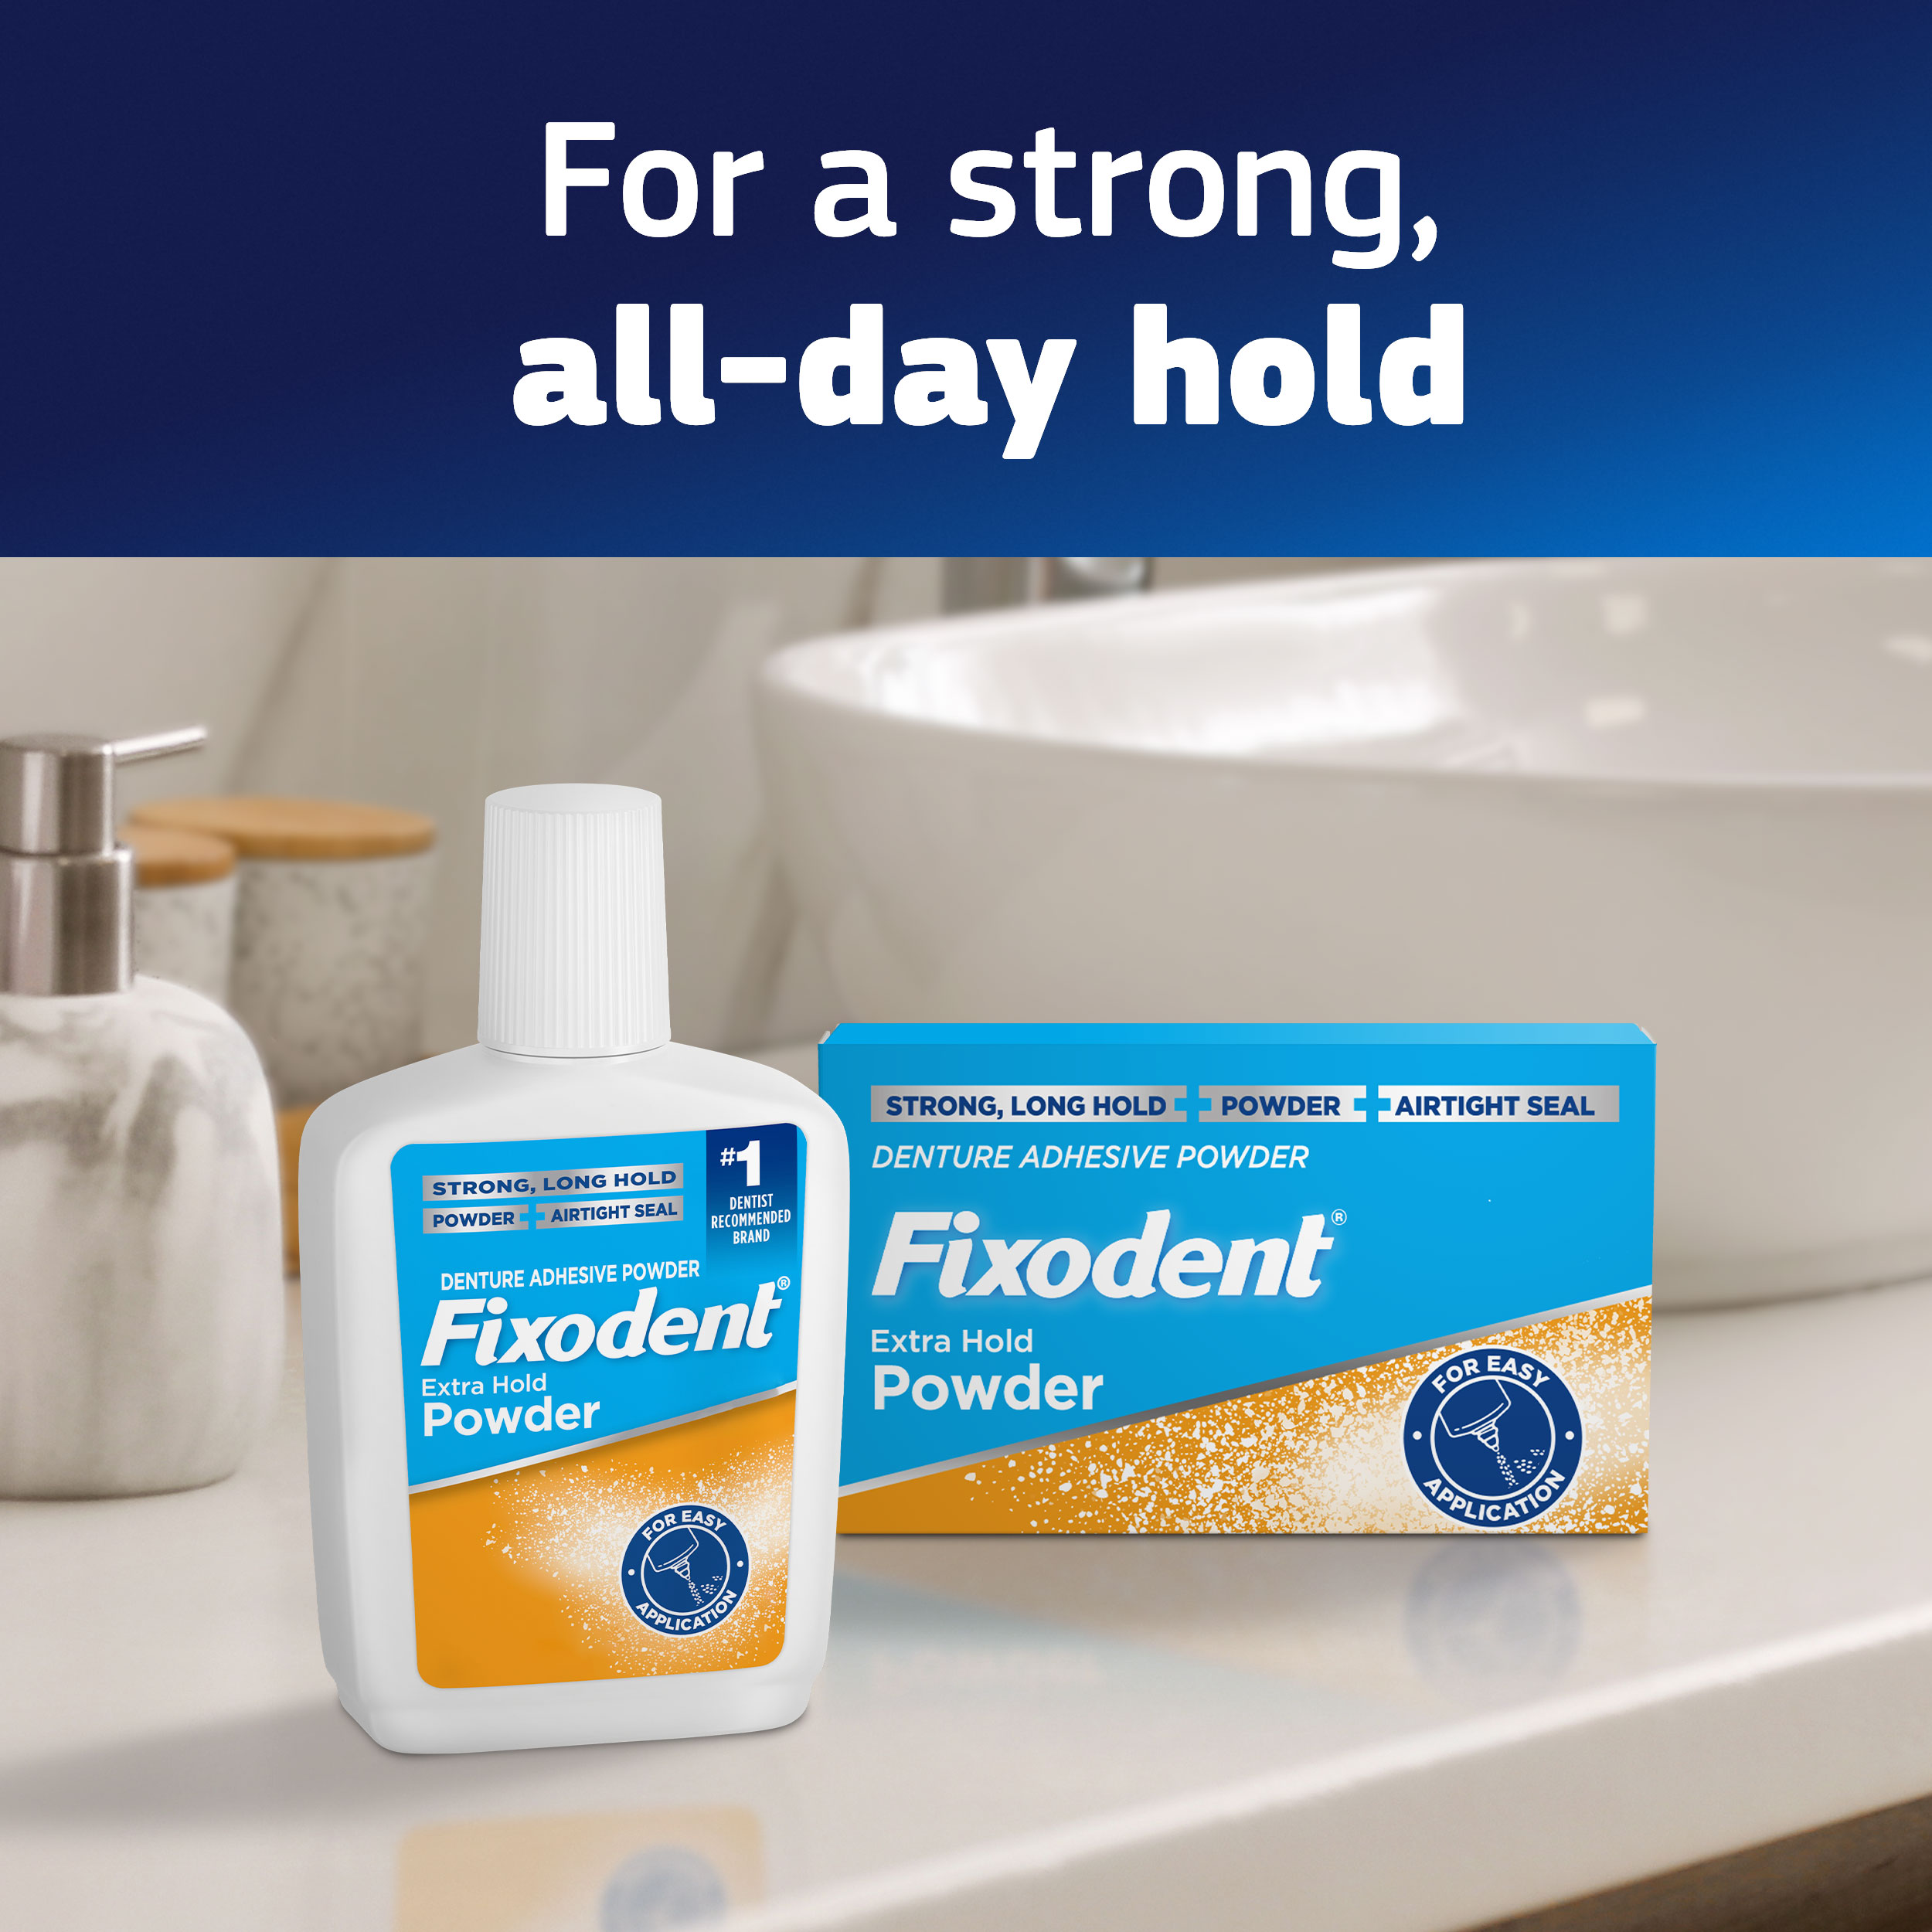 Fixodent Extra Hold Powder  - For a strong all-day hold